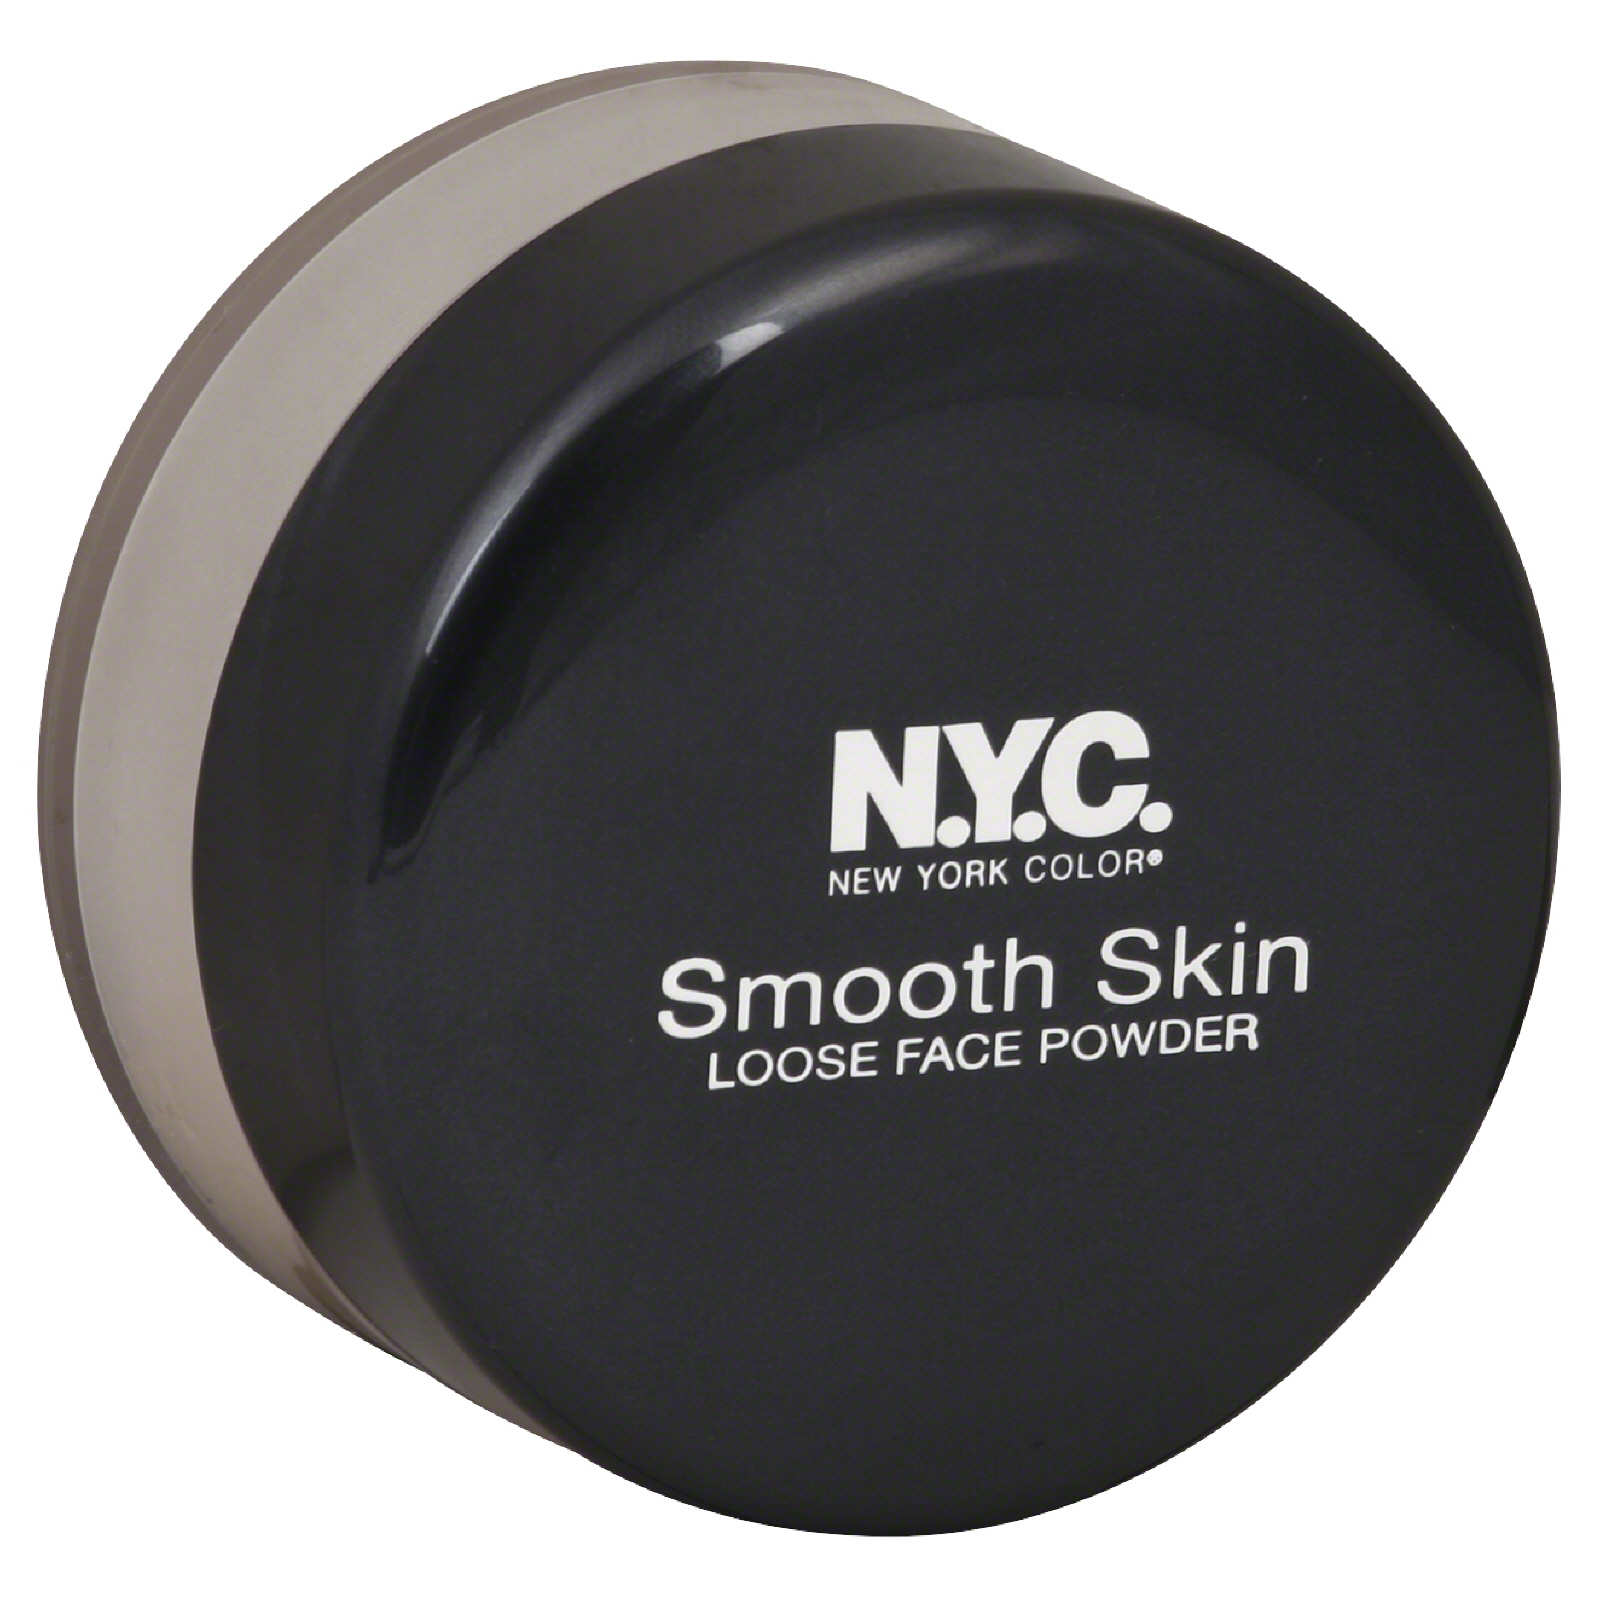 New York Color Face Powder Loose Smooth Skin